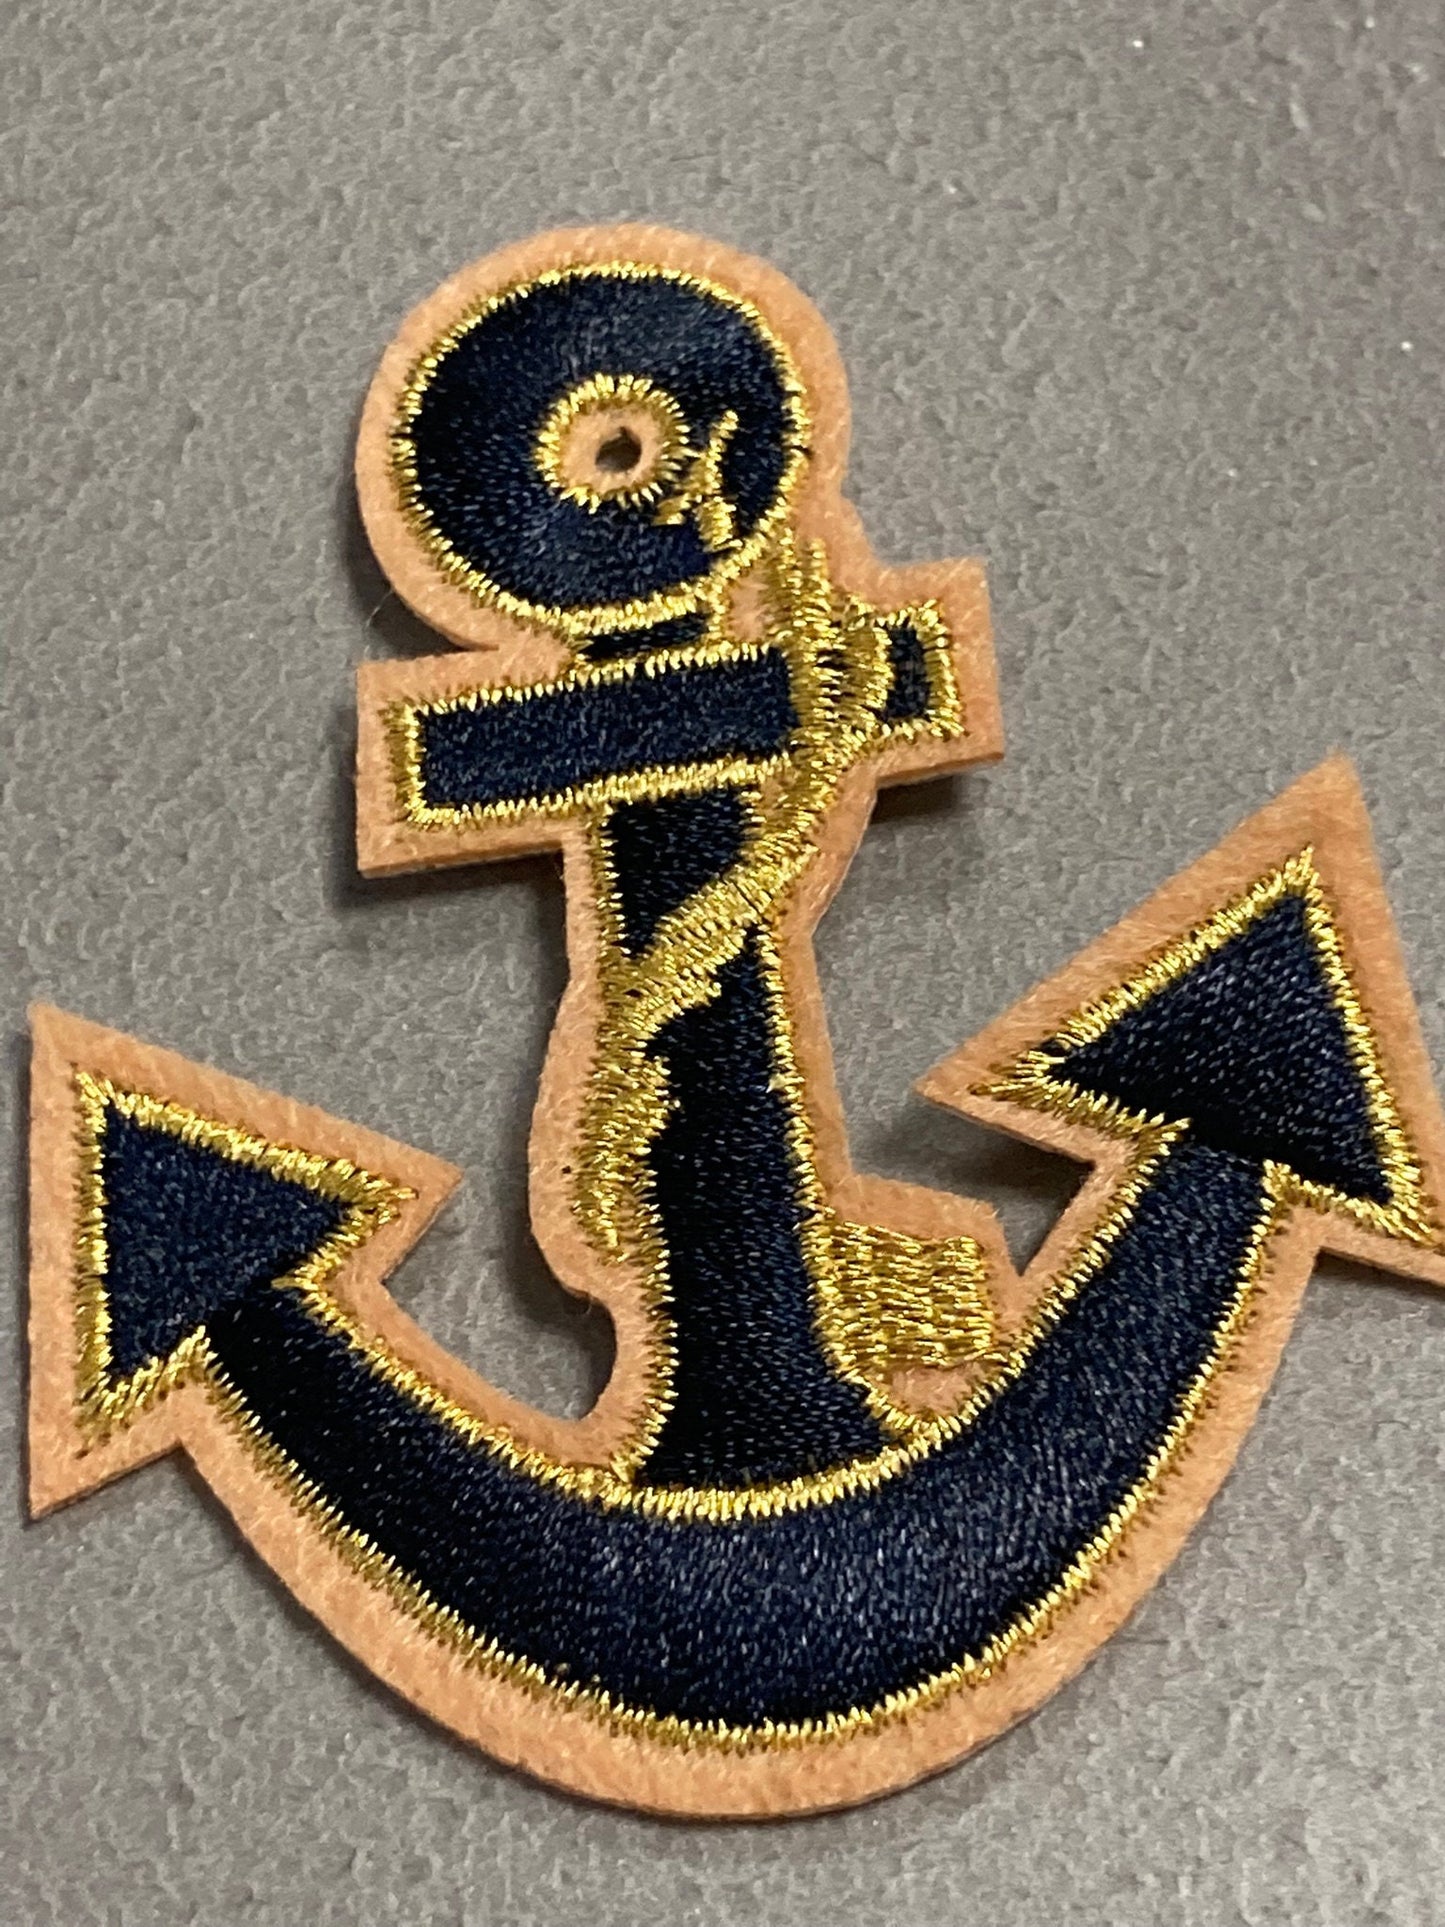 Iron On Nautical Anchor Patch Navy Blue and Gold appliqué